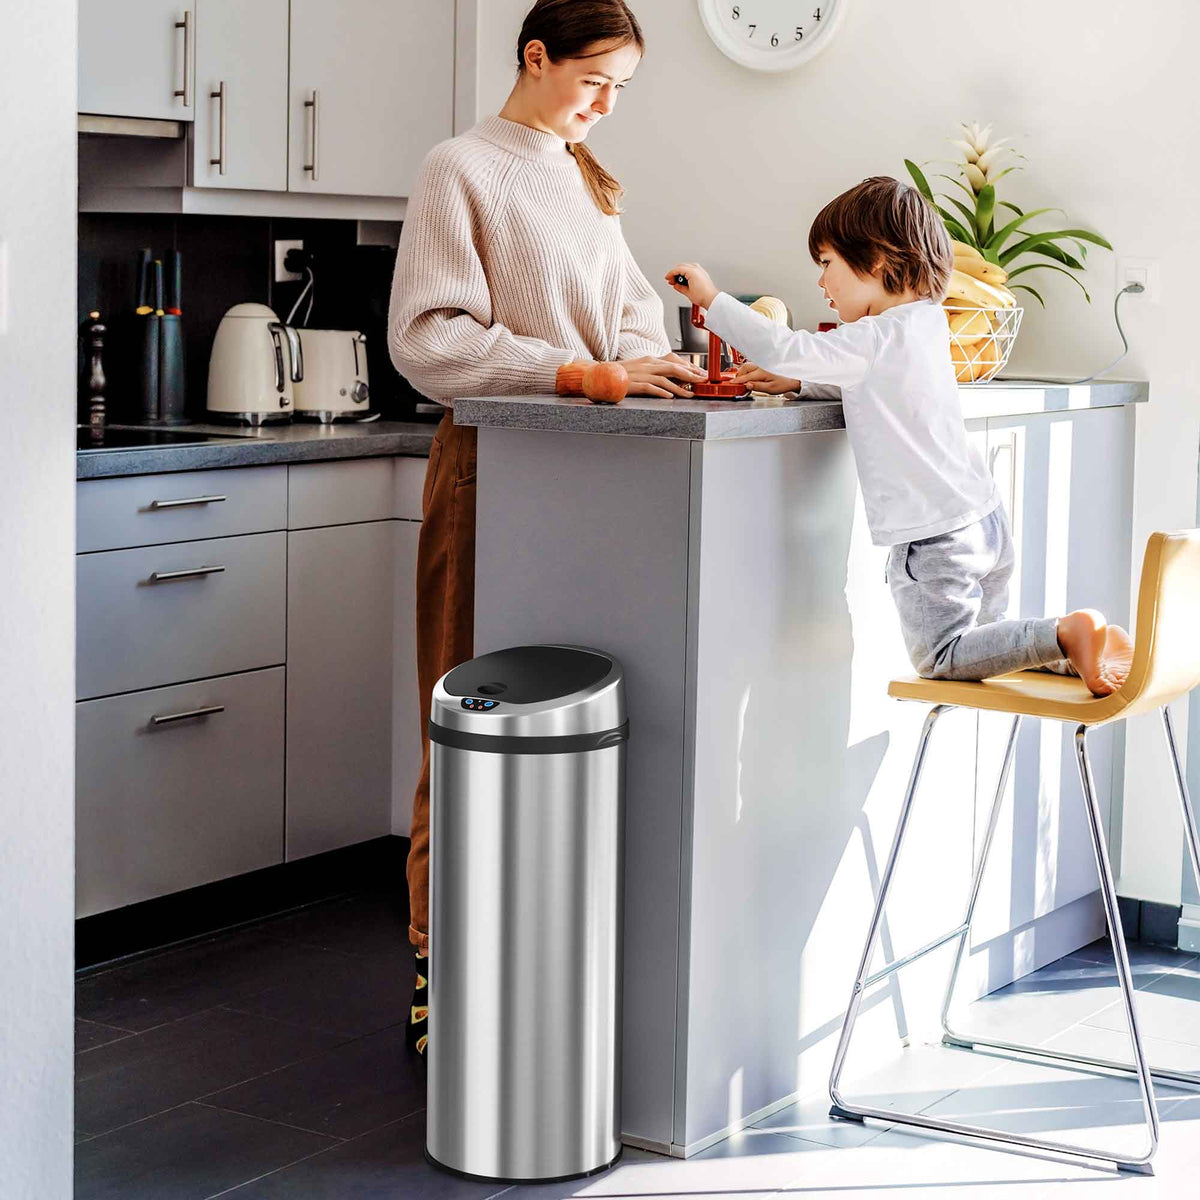 iTouchless 13 Gallon Stainless Steel Sensor Trash Can with Odor Filter in kitchen